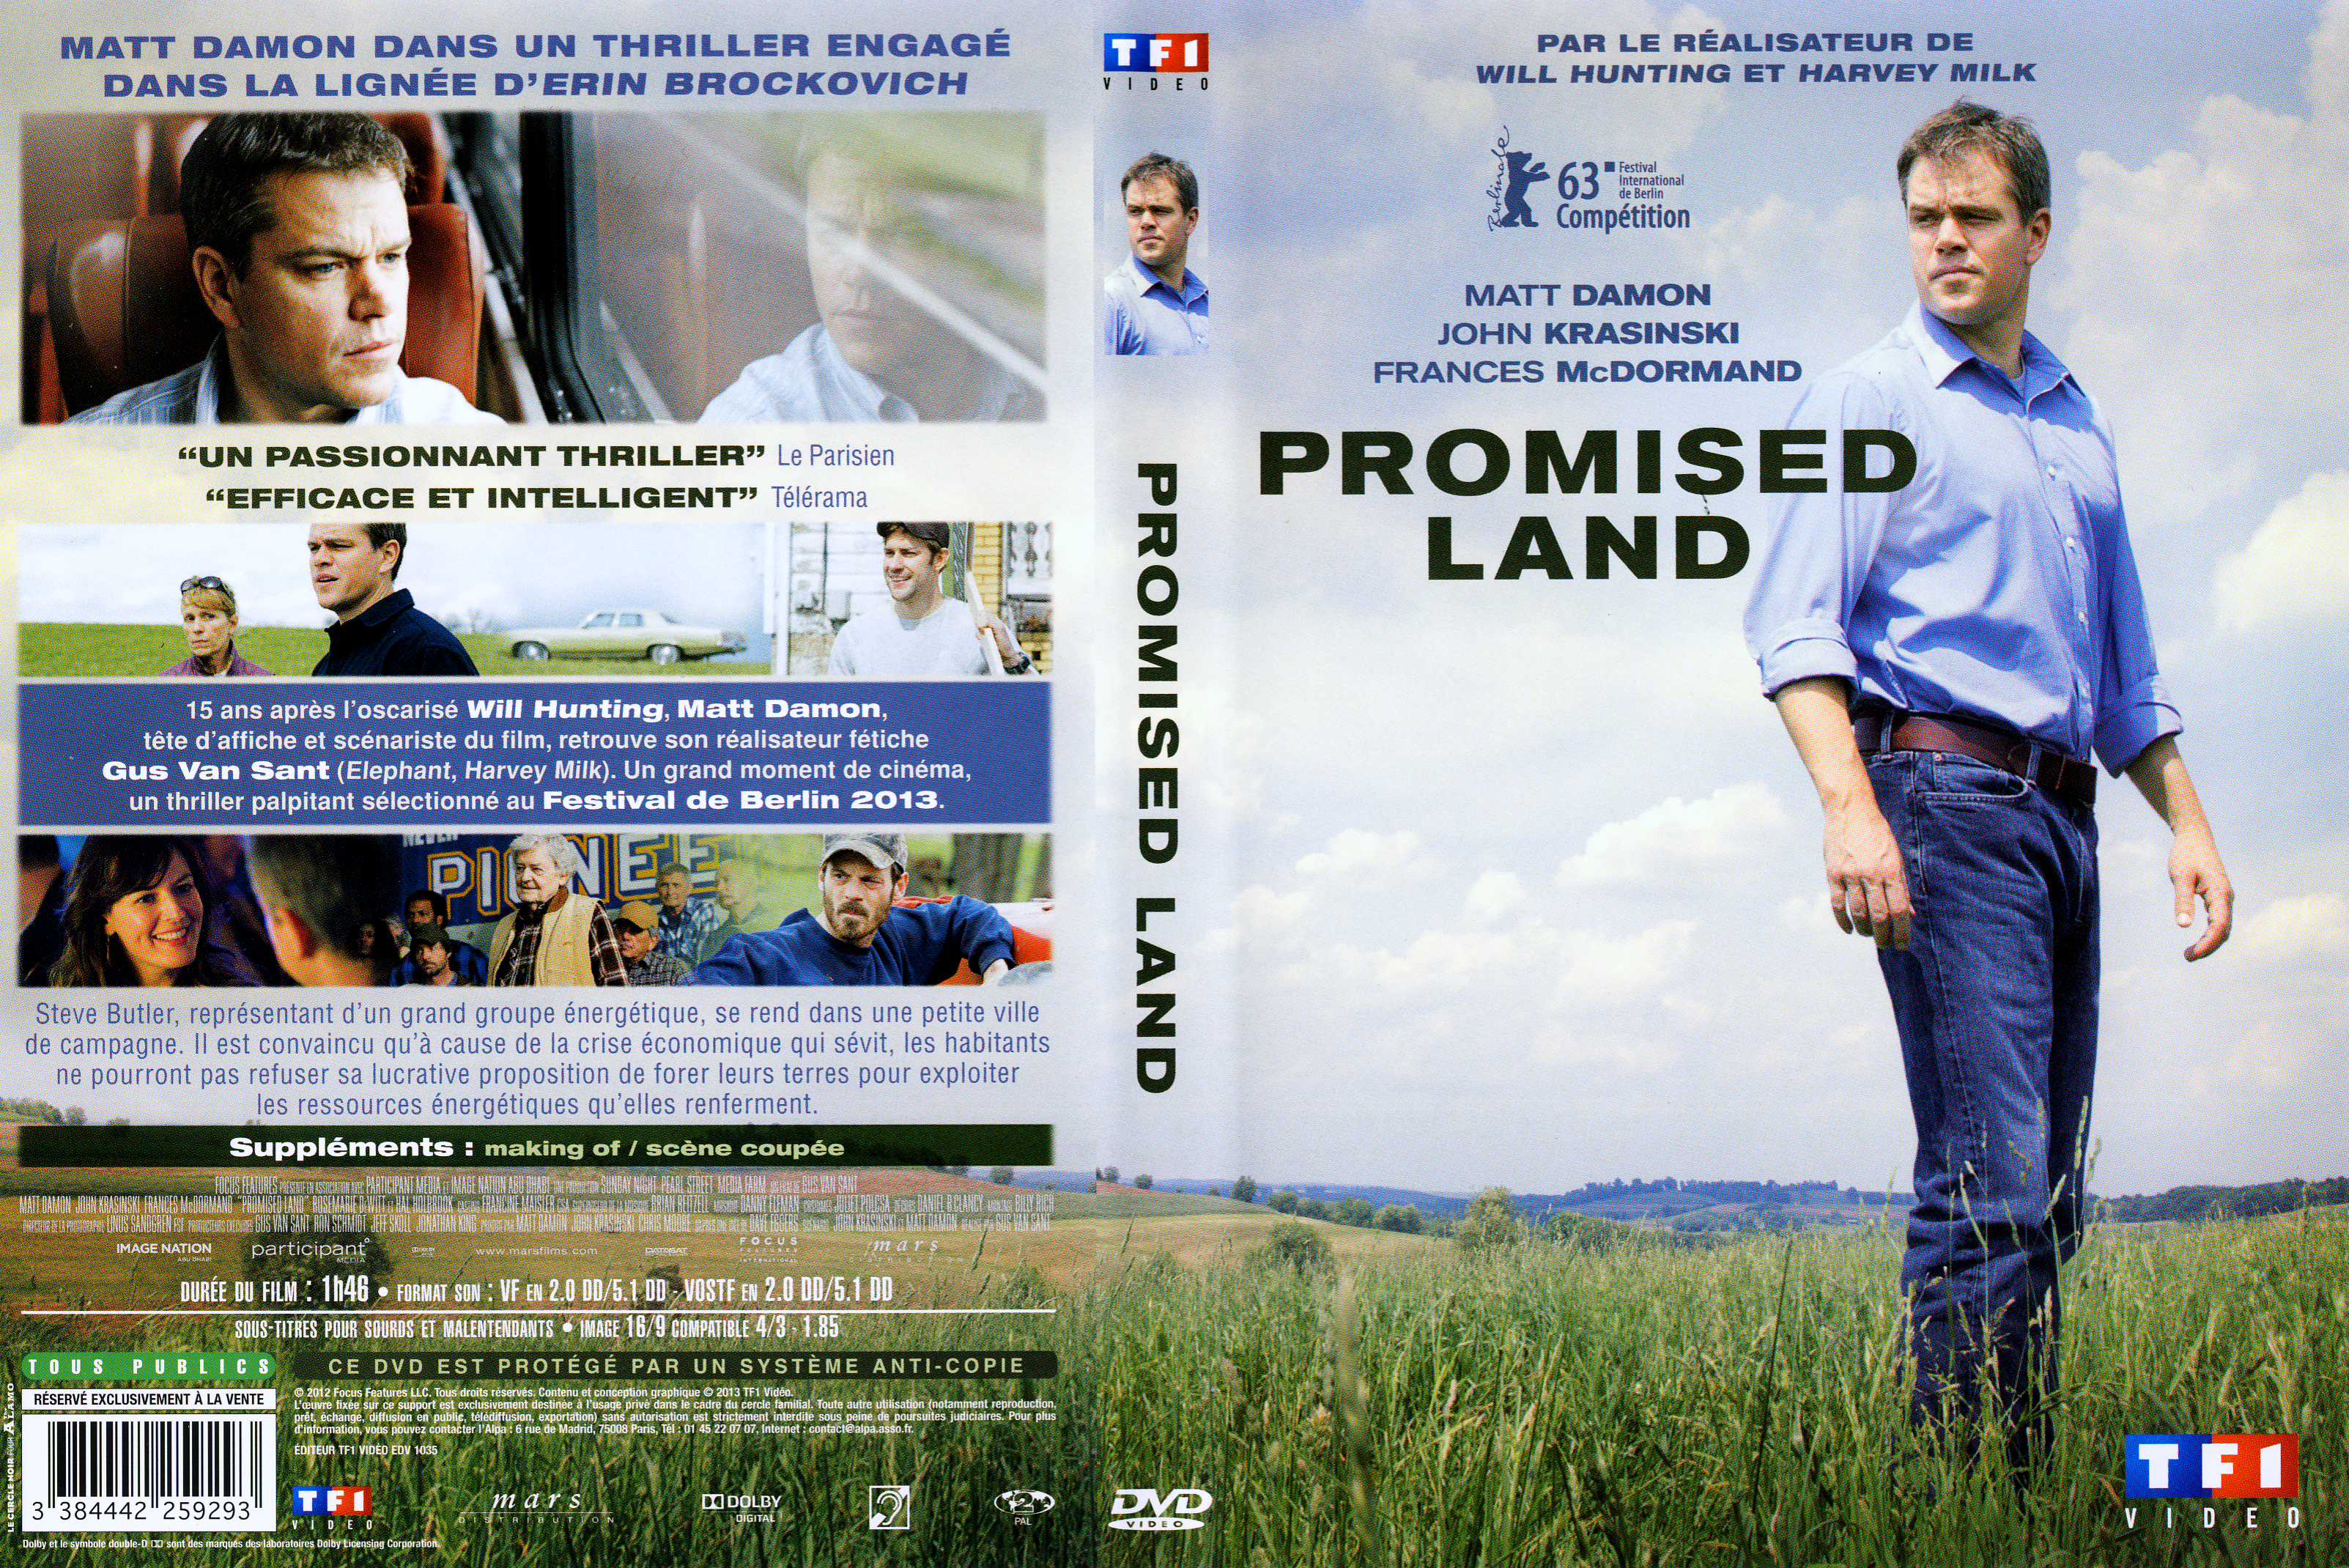 Jaquette DVD Promised land